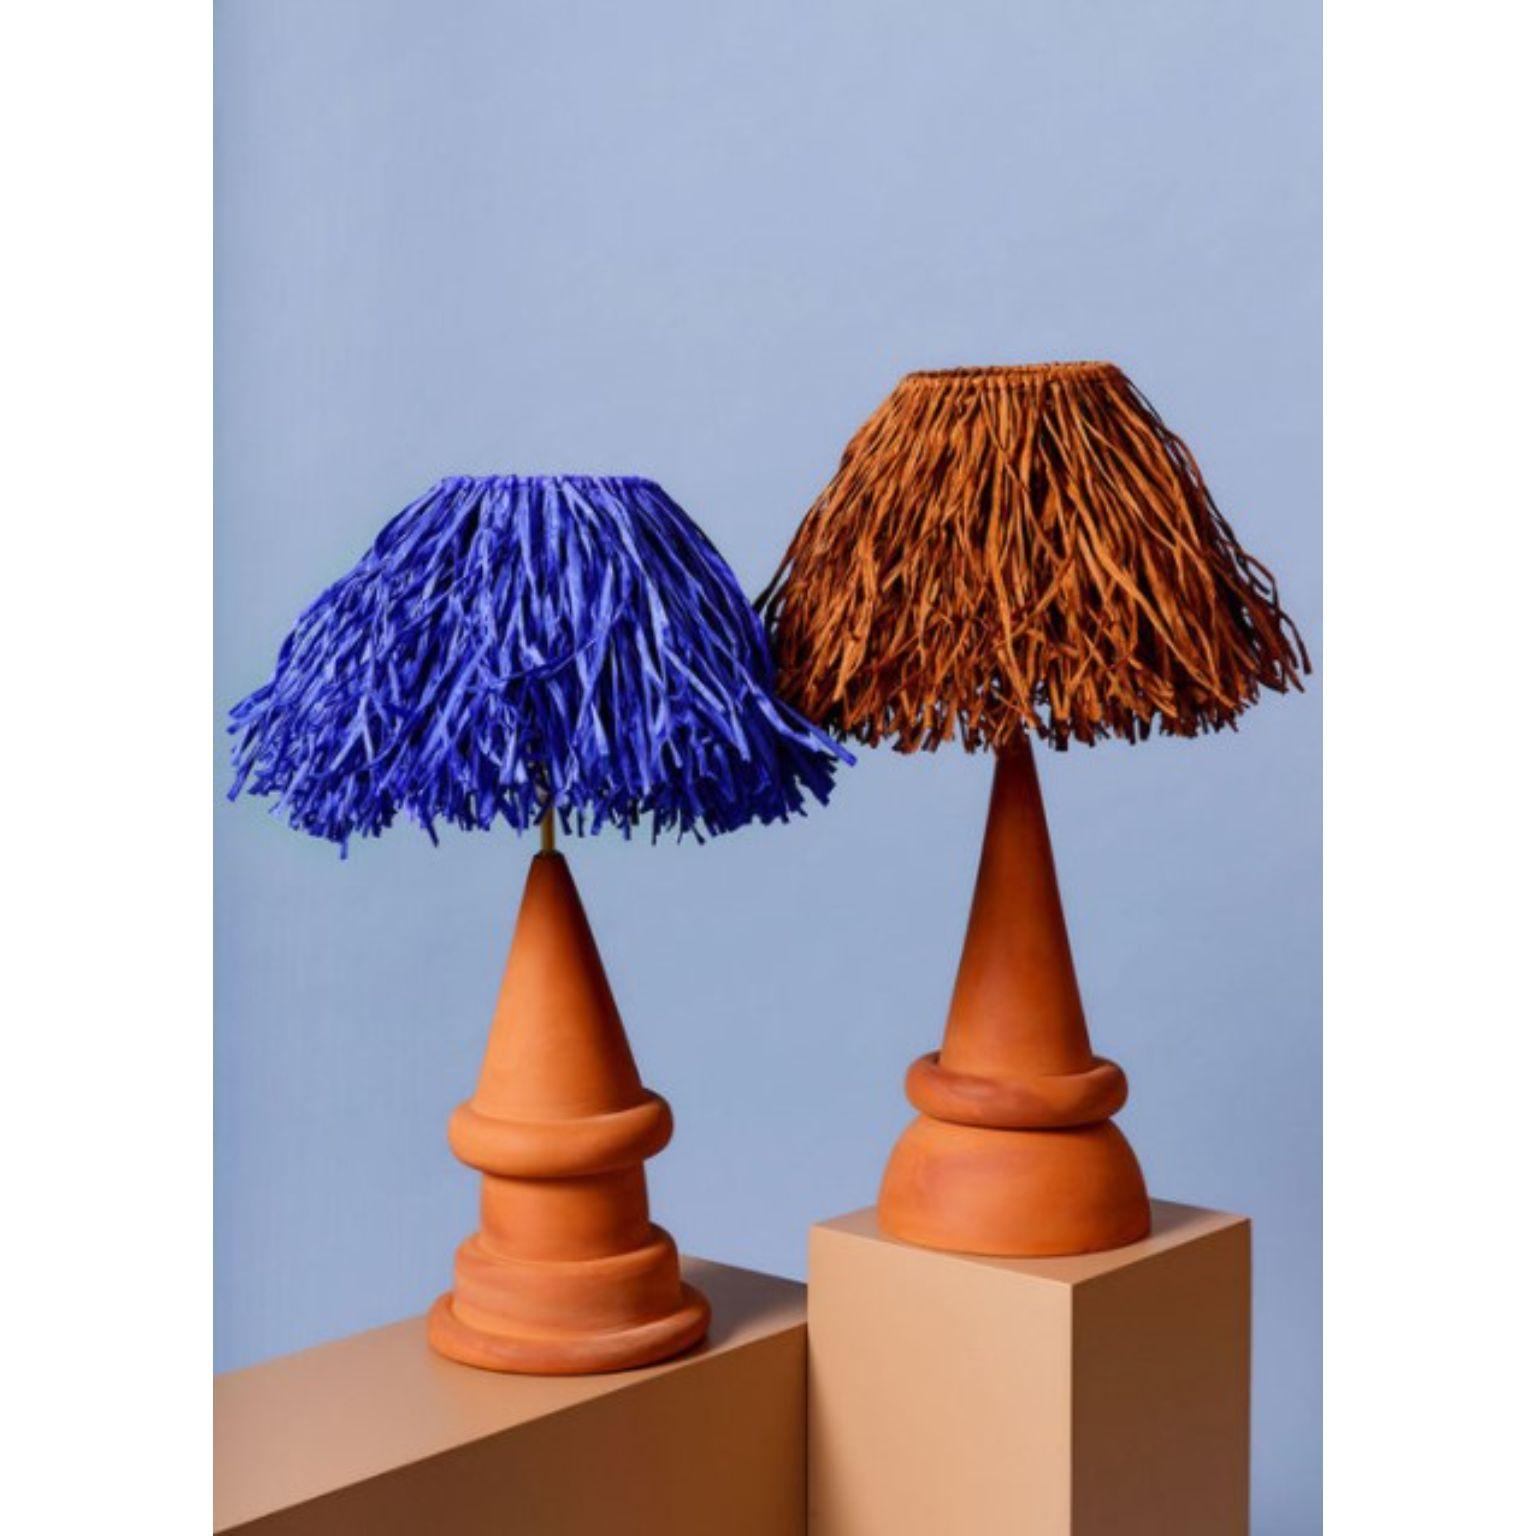 Set of 2 Tiki lamps by Tero Kuitunen
Material: slip cast terracotta, hand knot paper
shade, brass and textile cable. 
Dimensions: D30 x H55 cm
Edition of 3
Also Available in colours: Blue, White,Brown.

All our lamps can be wired according to